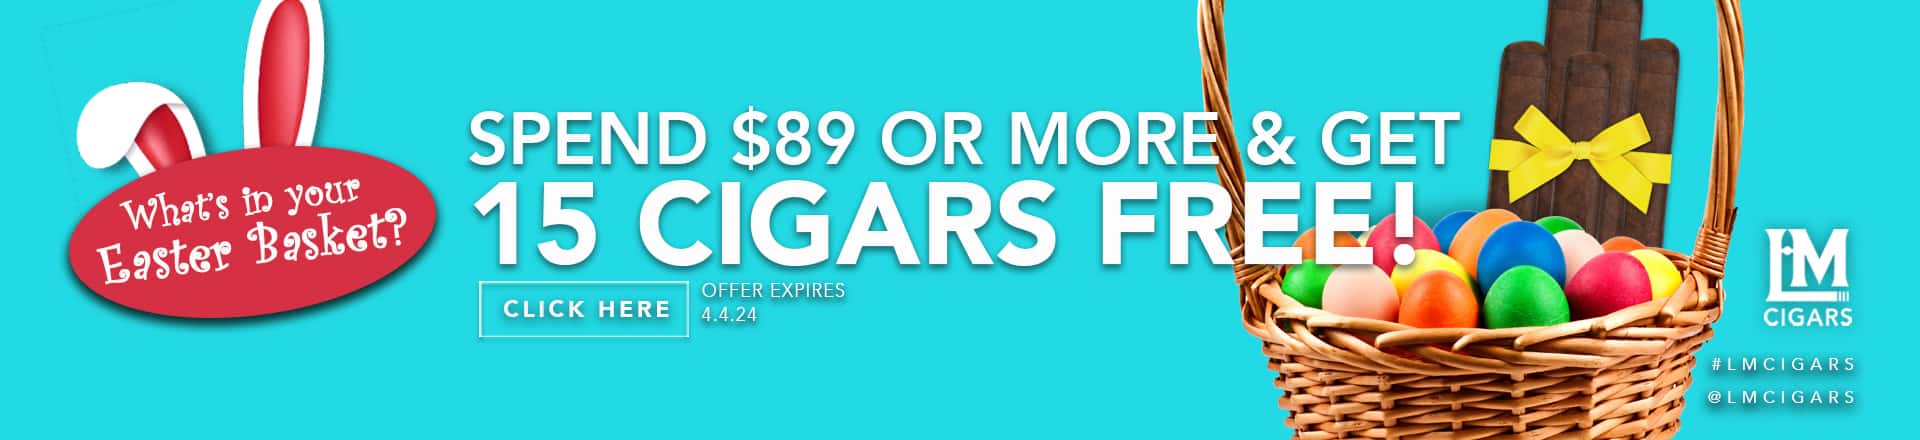 free 15 pack of cigars with order of $89 or more